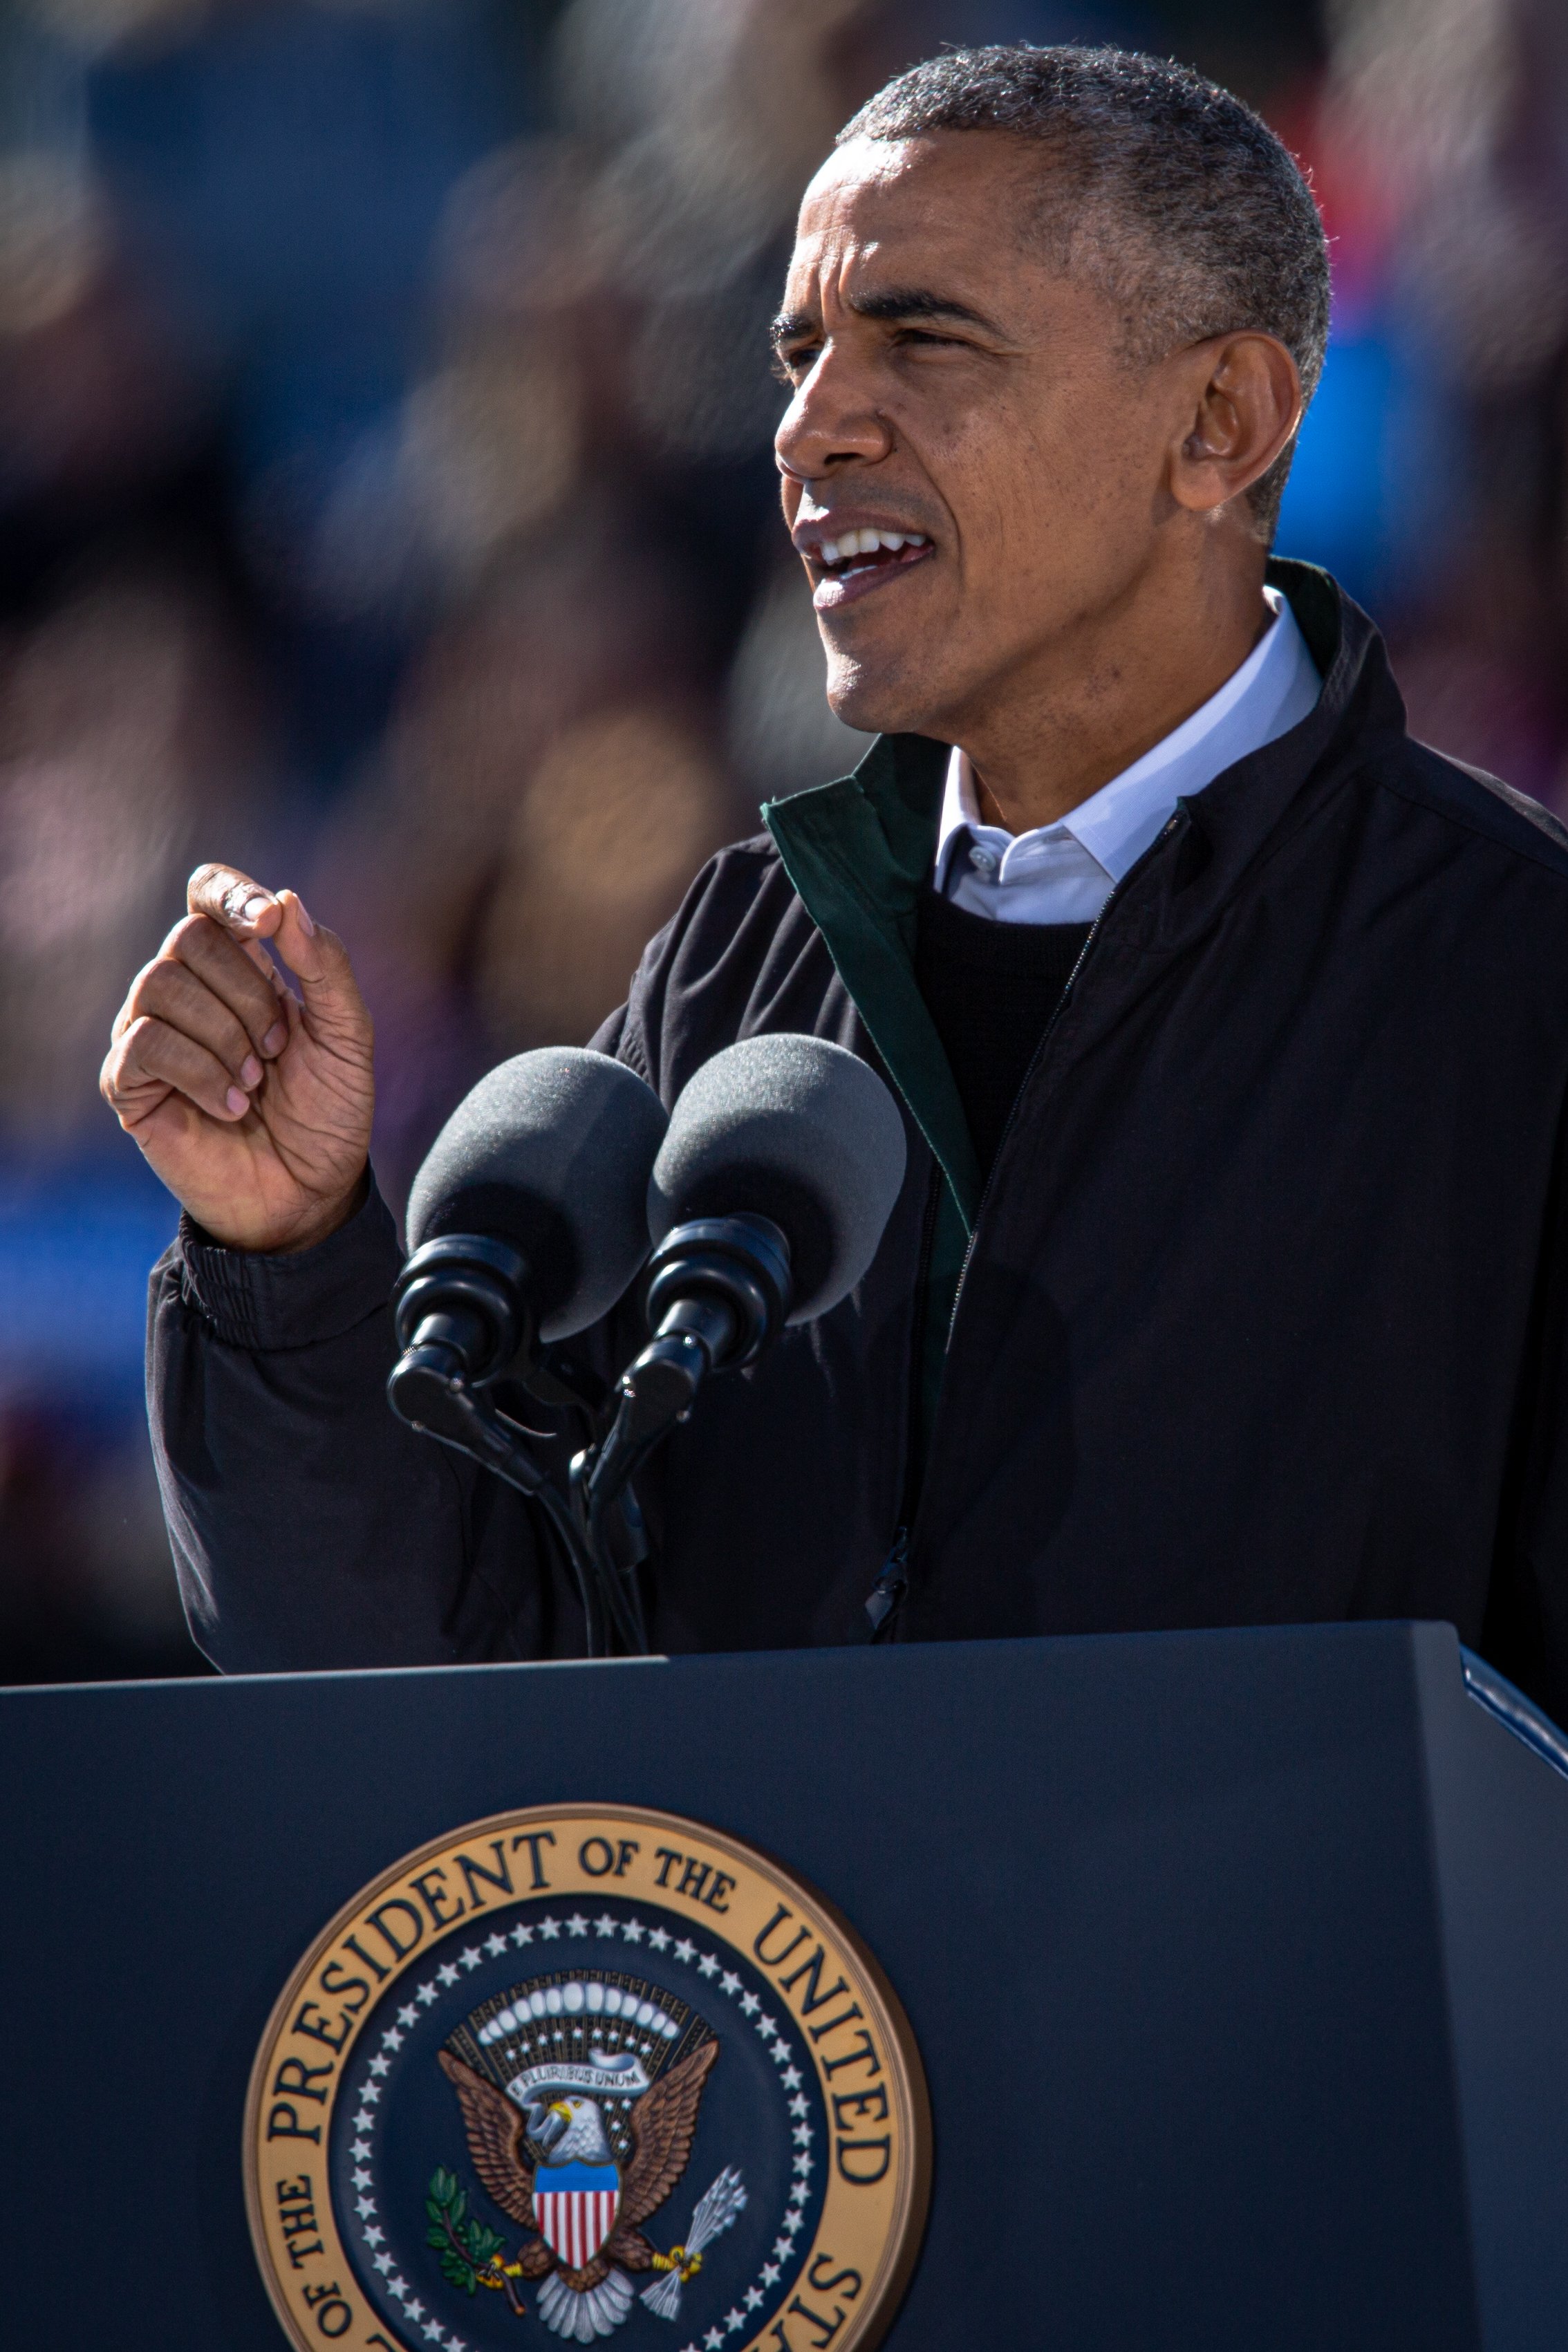  President Barack Obama speaks at a campaign rally for Democratic presidential candidate Hillary Clinton at Burke Lakefront Airport in Cleveland, Ohio on Friday, Oct. 4, 2016.  